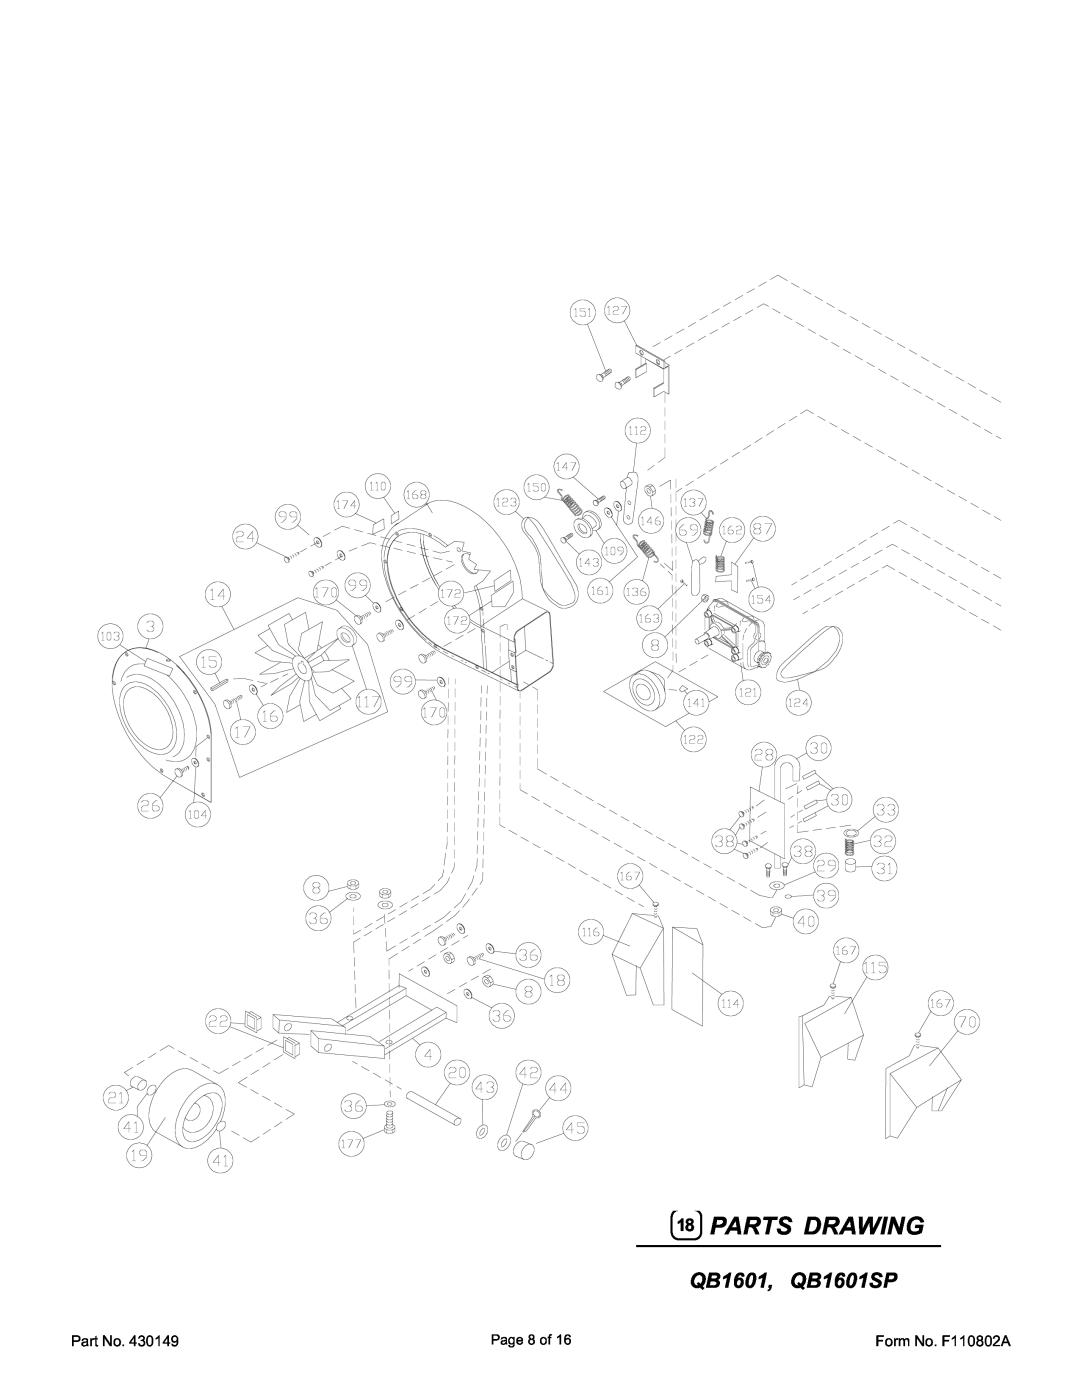 Billy Goat QB1601, QB1601SP specifications 18PARTS DRAWING 